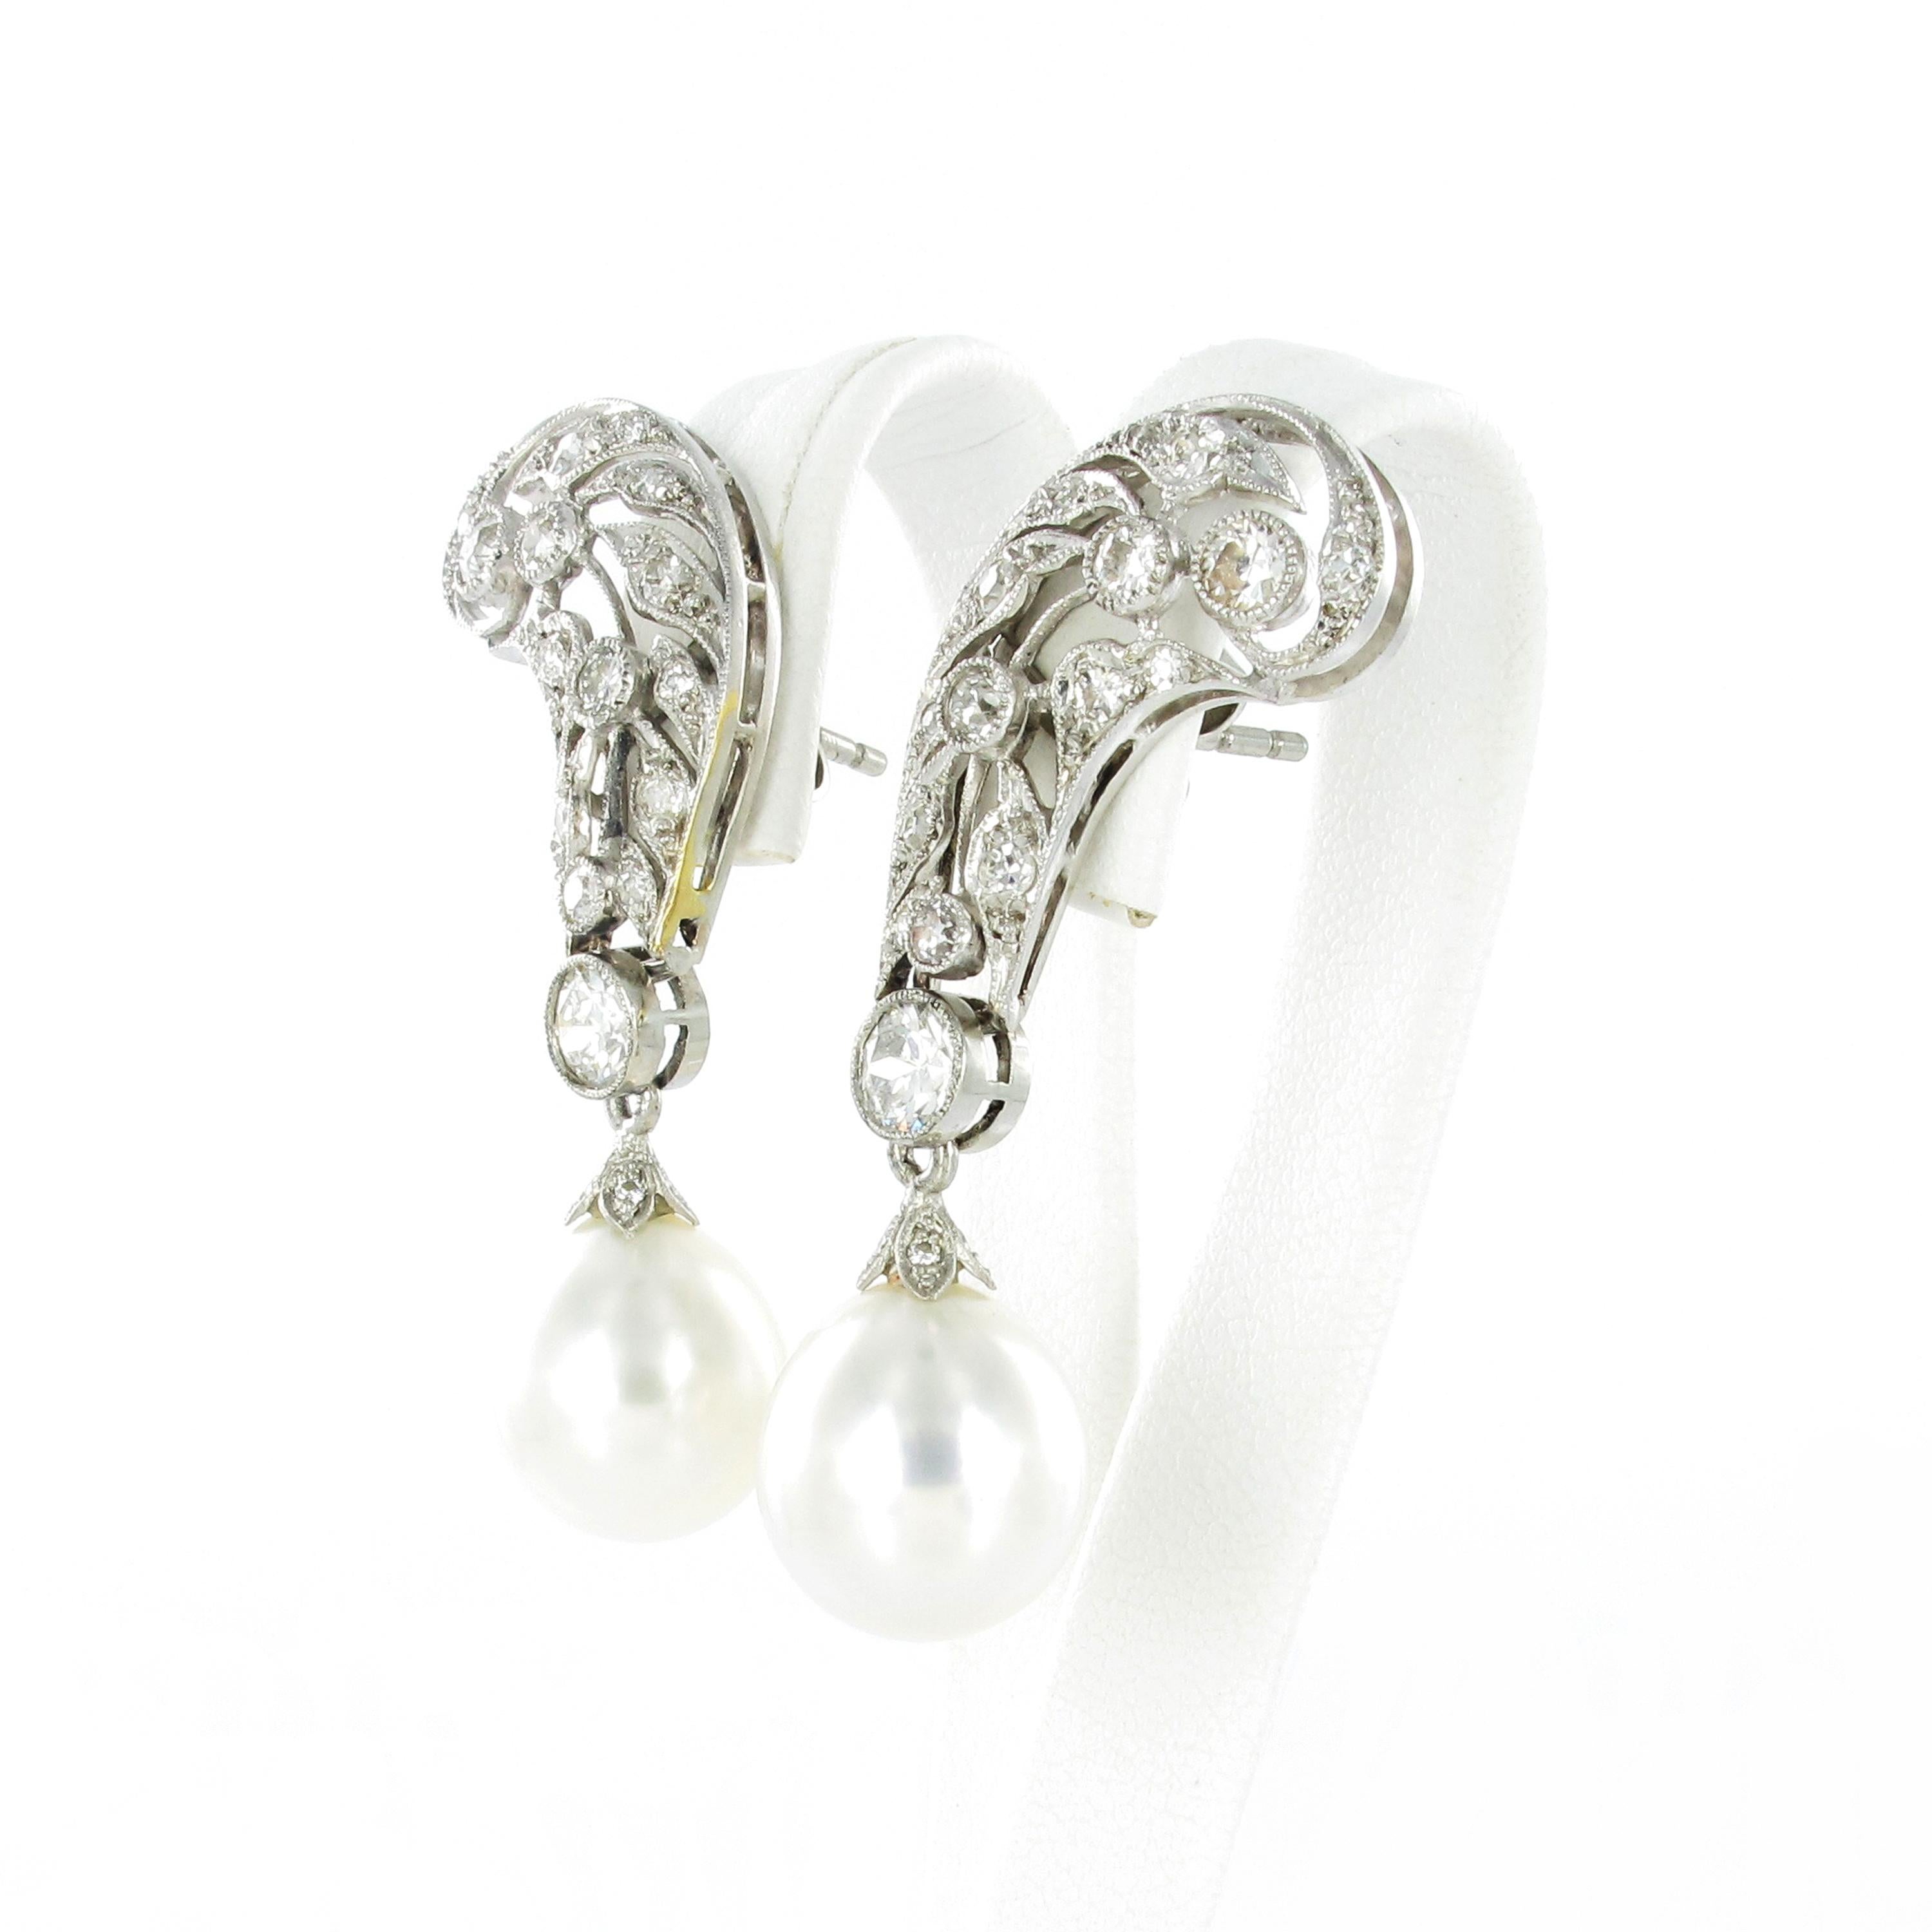 Fabilous pair of earrings in Platinum 950. The pair is approximate from the 1940ies and nicely crafted. Millgraine set with 60 old cut diamonds totaling approximate 2 ct. The diamonds are of G/H color and vs/si1 clarity. 
The two drop shaped